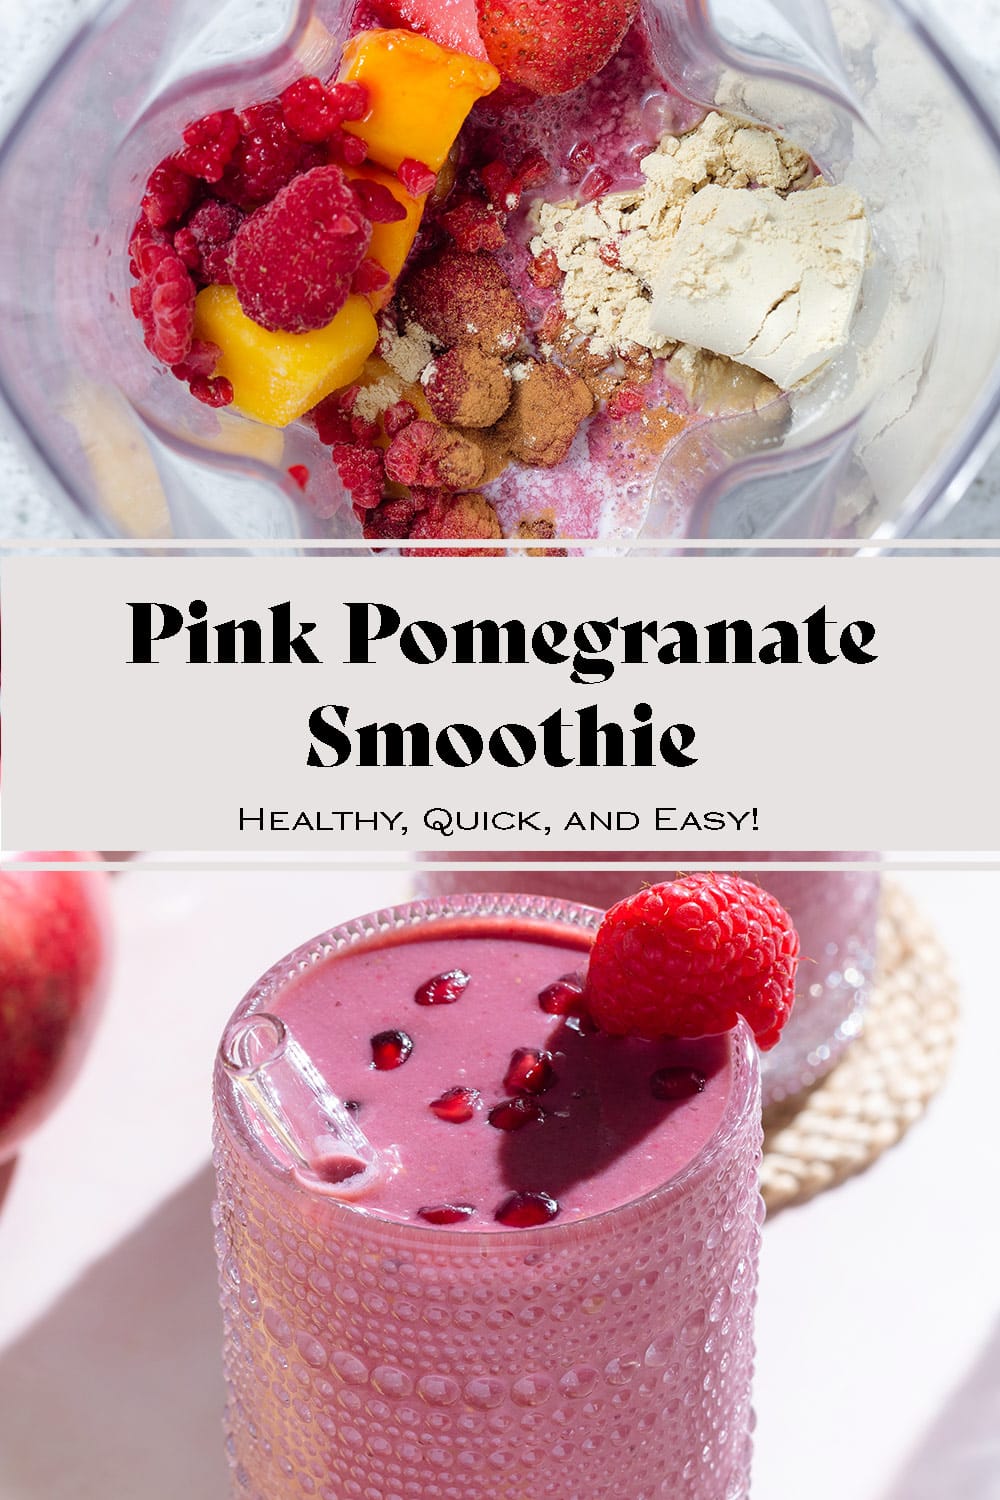 Pink Pomegranate Smoothie